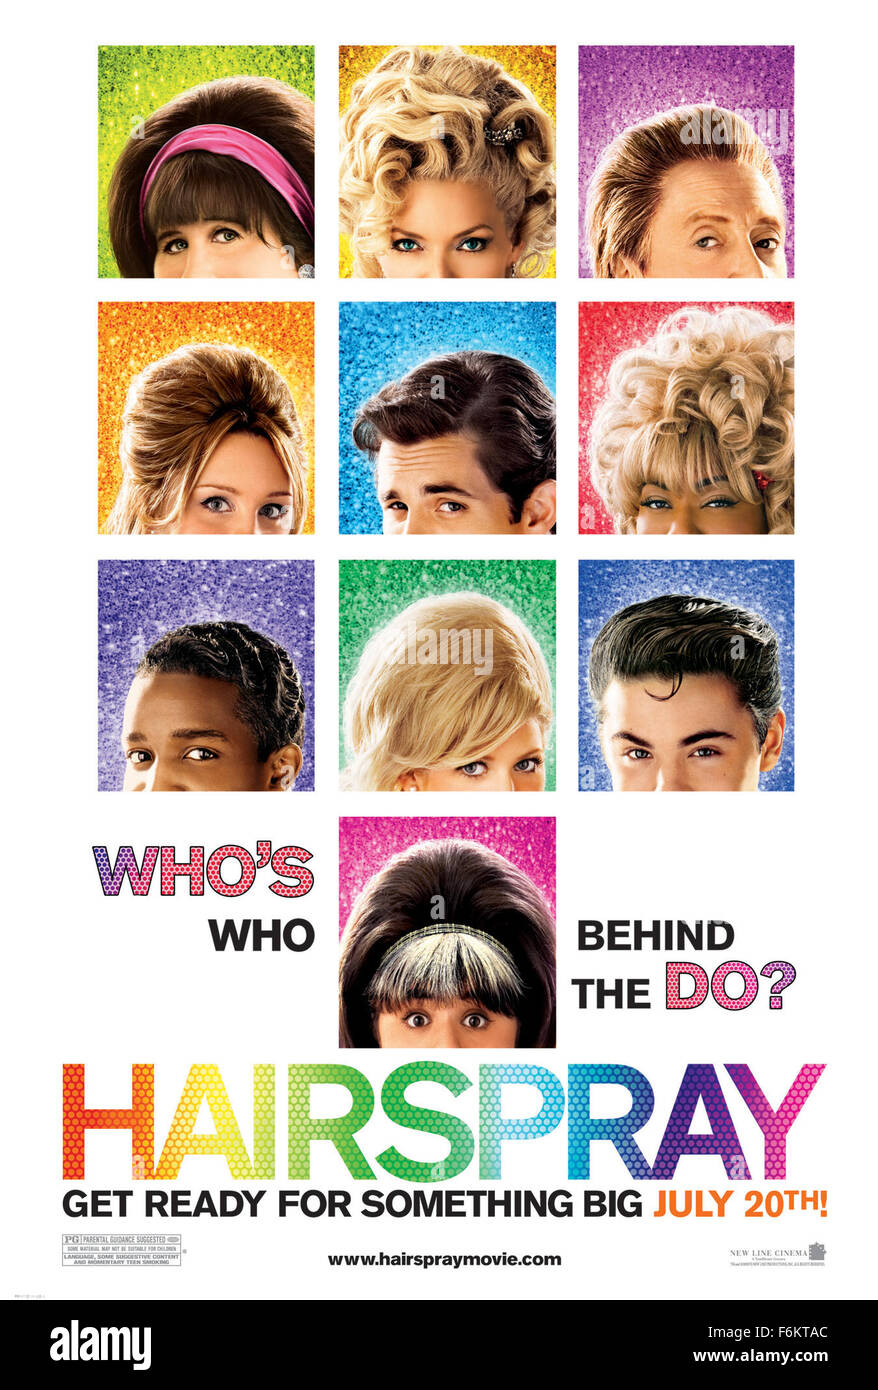 RELEASE DATE: July 20, 2007. MOVIE TITLE: Hairspray - STUDIO: Storyline Entertainment/New Line Cinema. PLOT: Pleasantly plump teenager Tracy Turnblad (Blonsky) teaches 1962 Baltimore a thing or two about integration after landing a spot on a local TV dance show. PICTURED: Movie Poster. Stock Photo